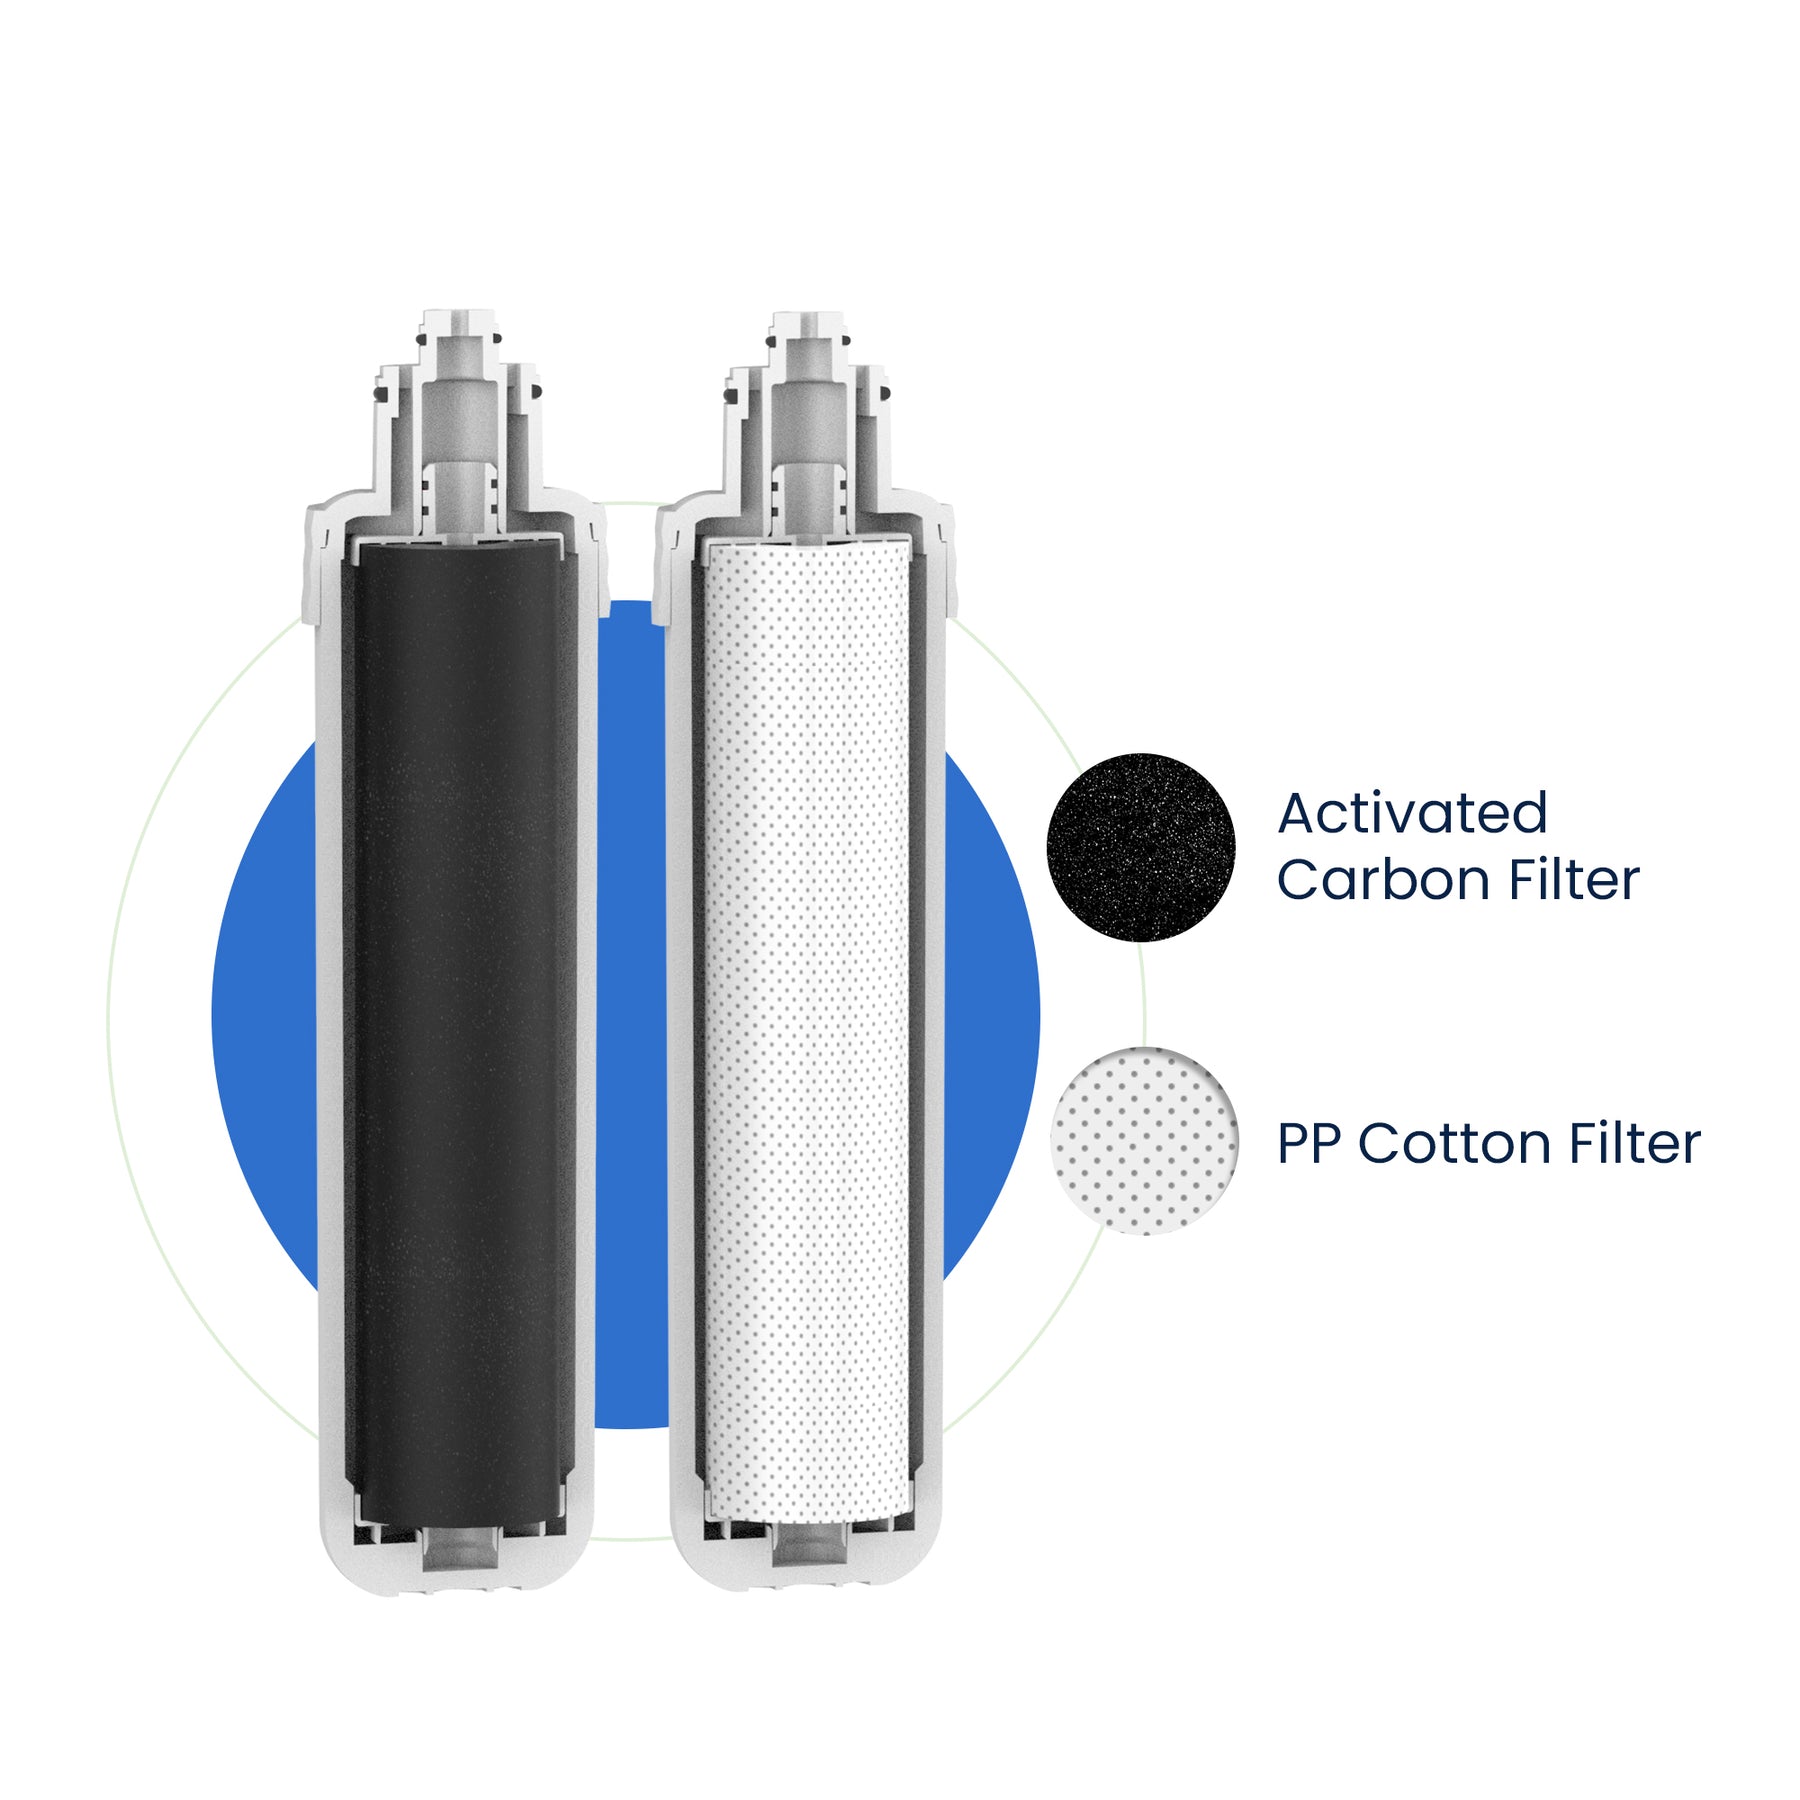 Glacier Fresh 2 Stage Water Filters Compatible with Avalon A4/A5